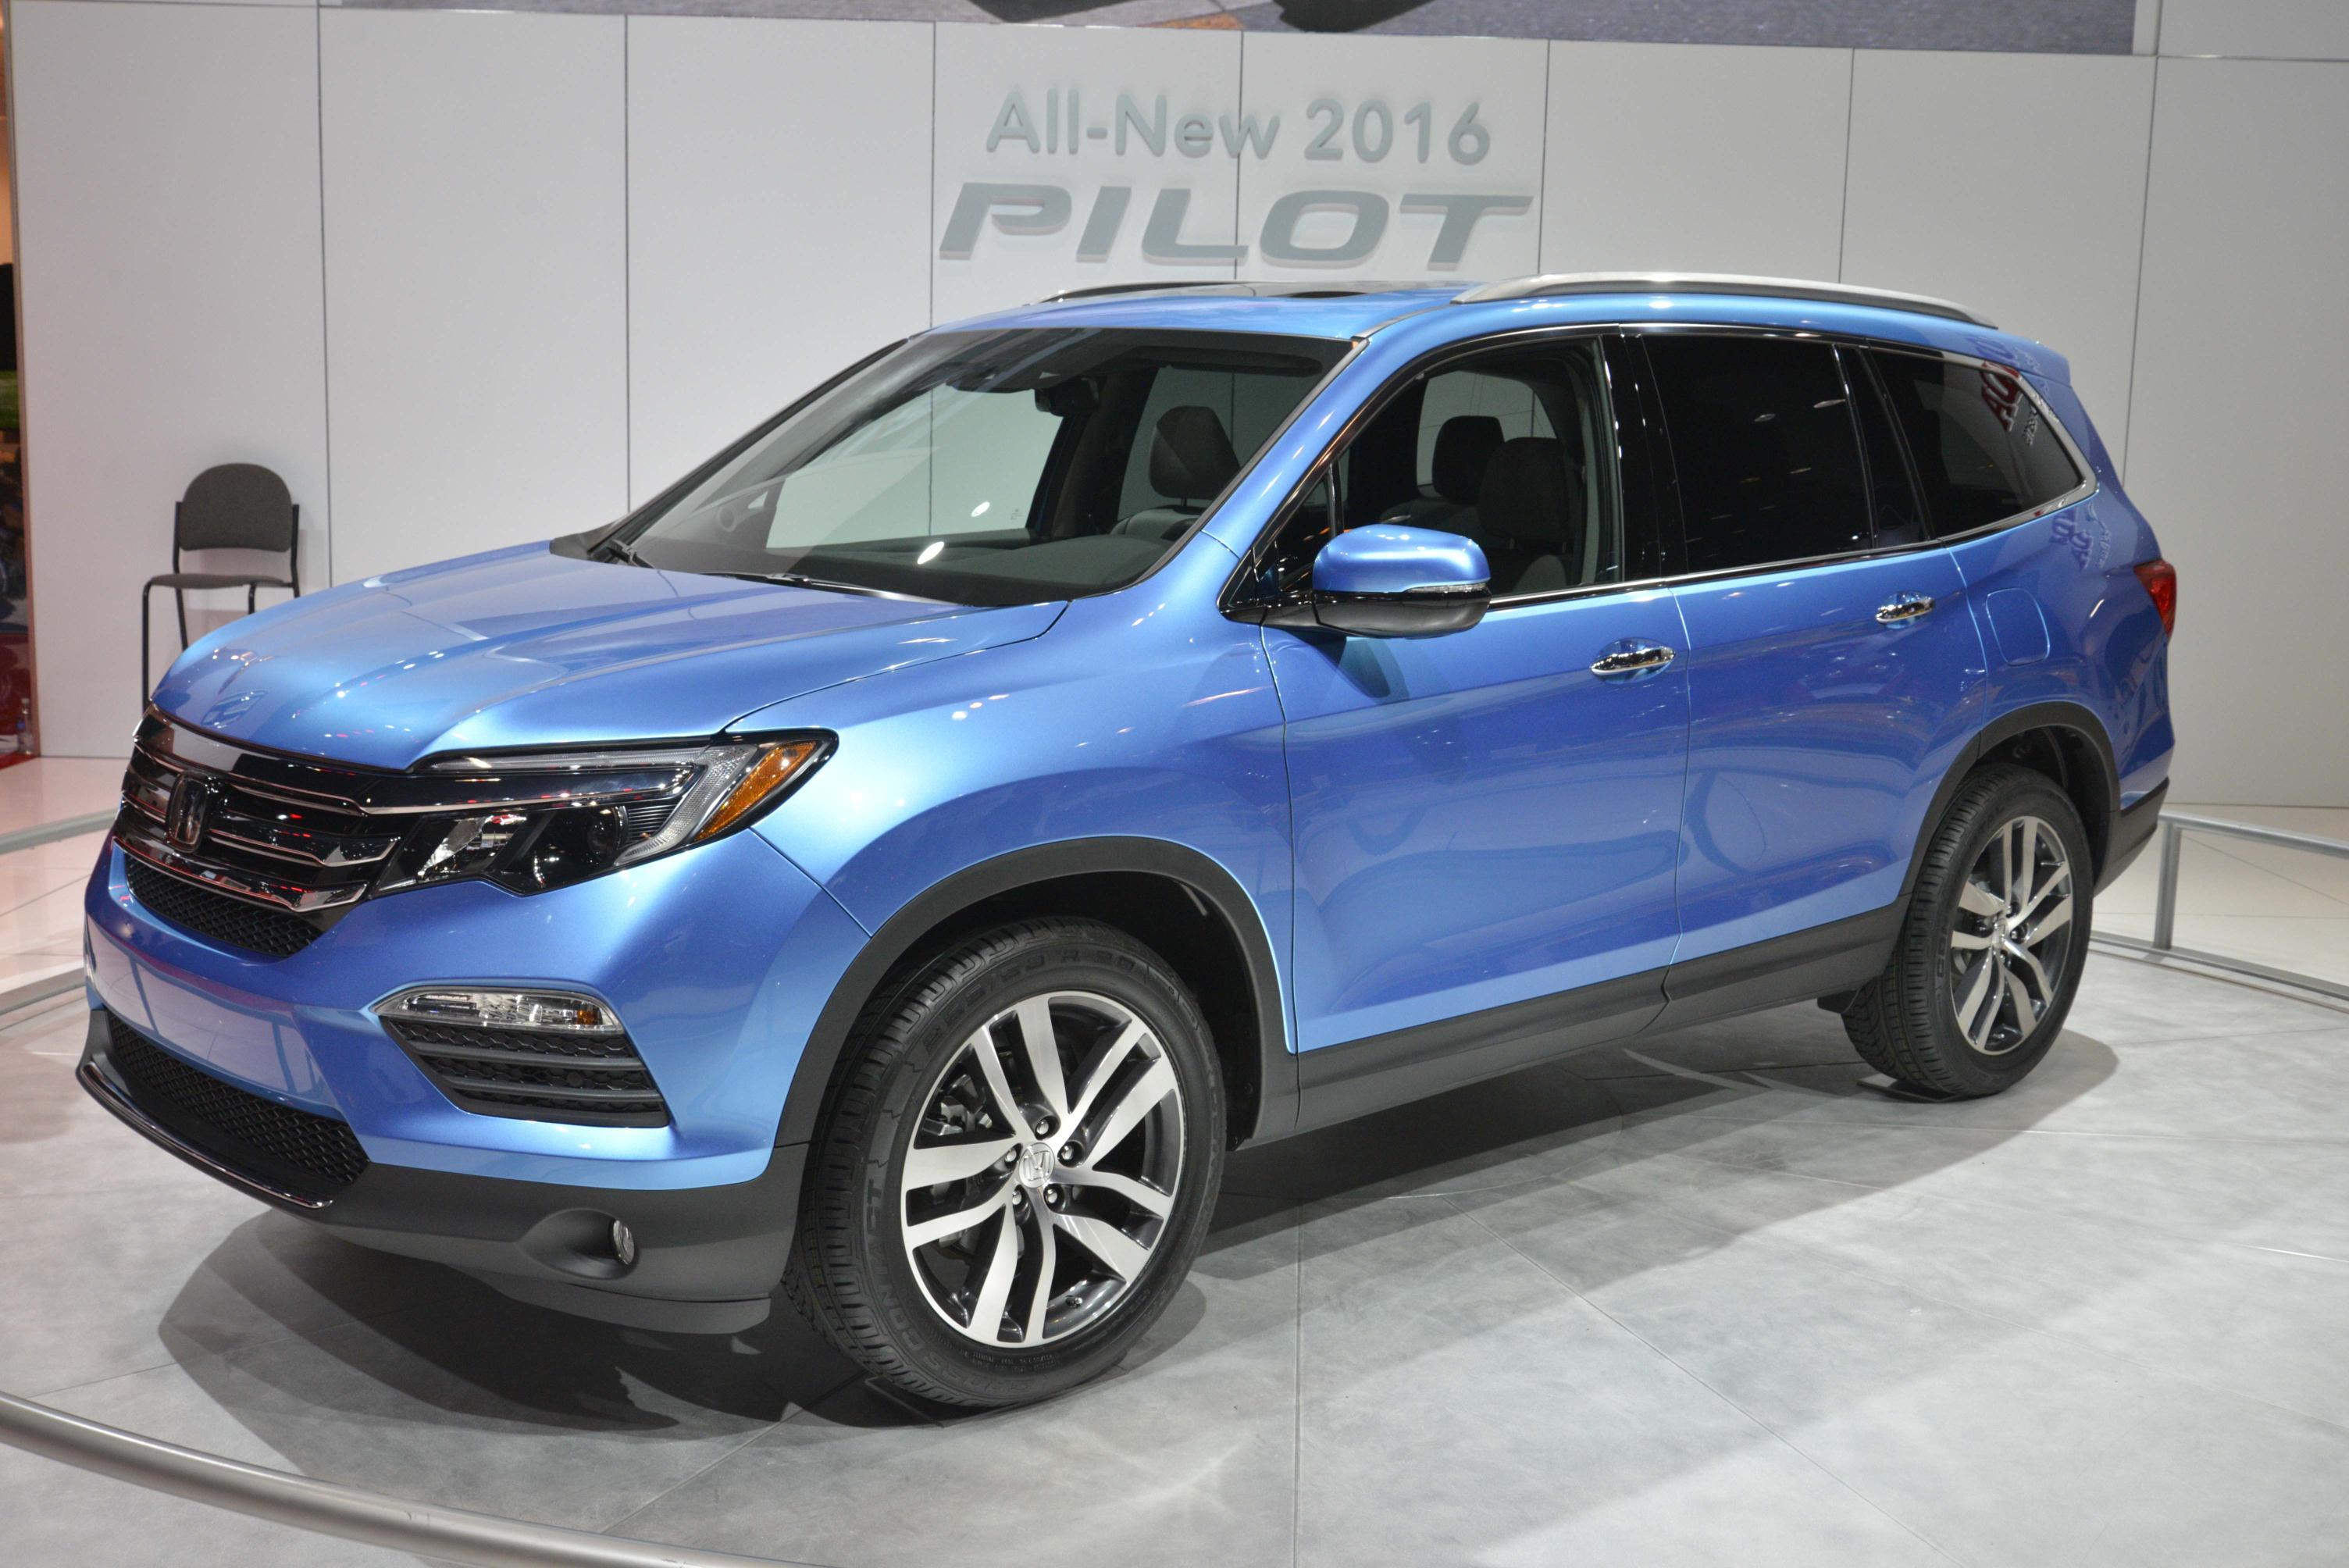 2016 Honda Pilot Is Lighter and Sexier for Chicago Auto Show Debut